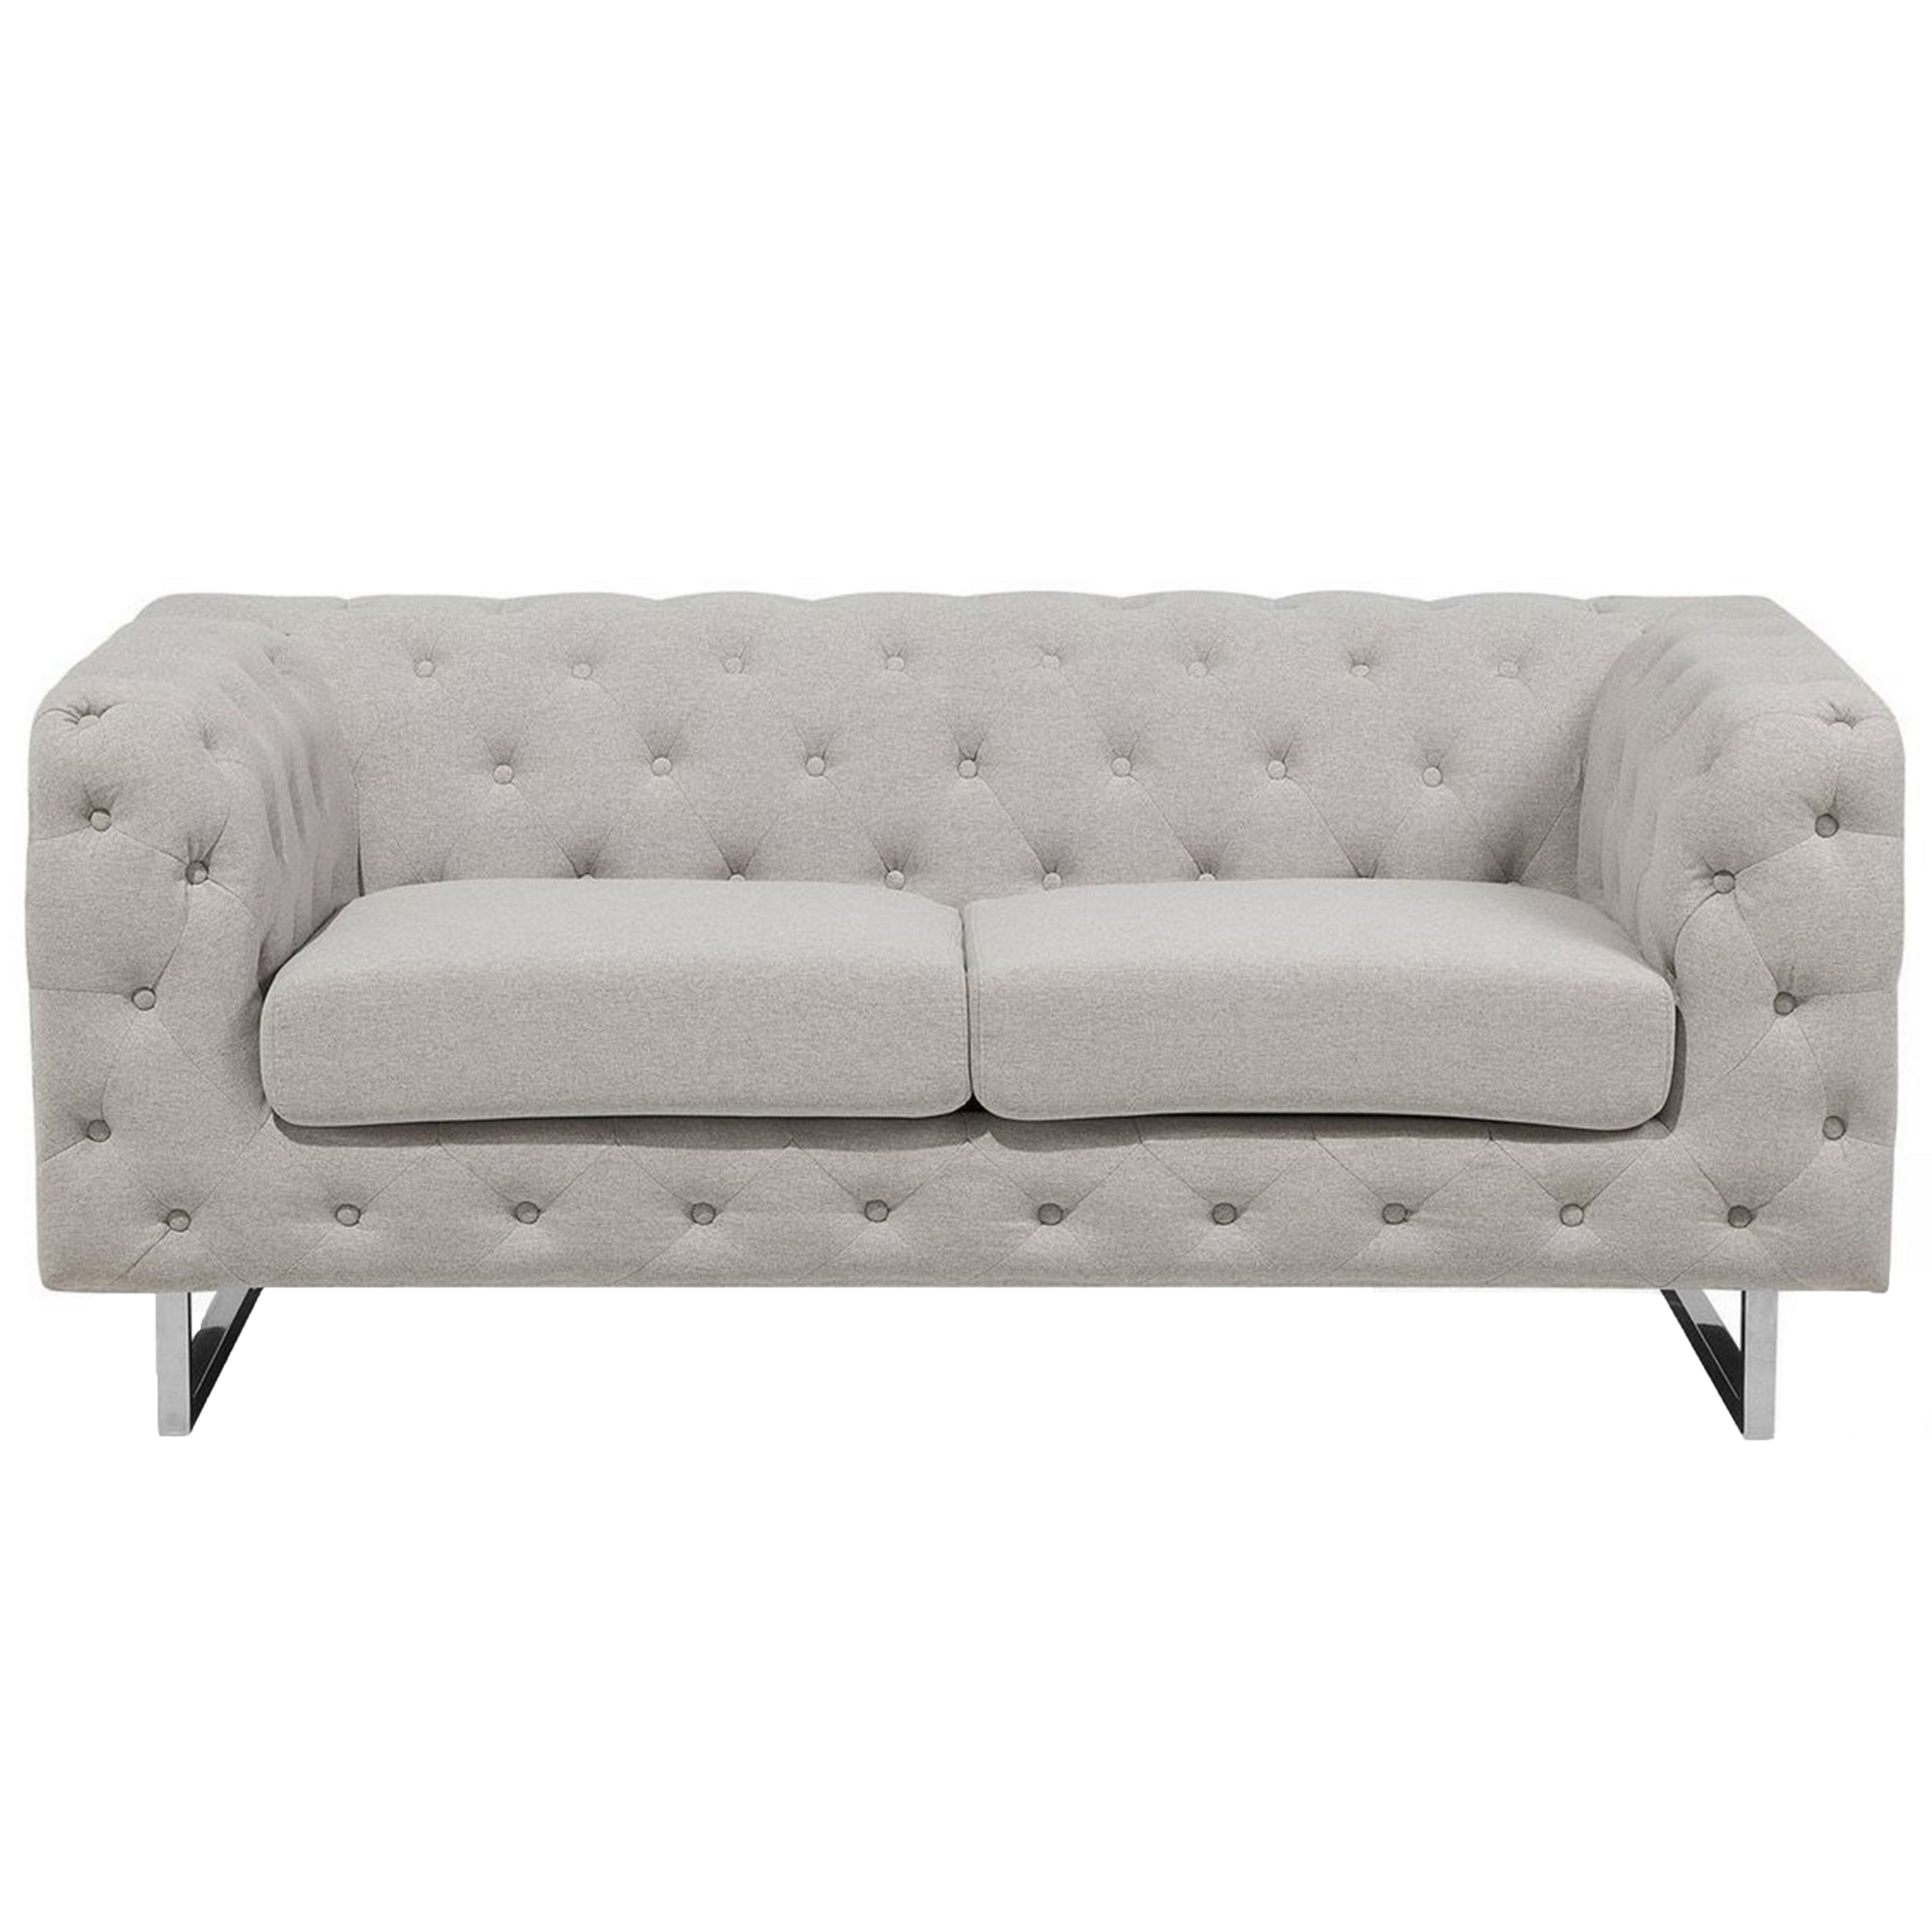 Beliani 2 Seater Chesterfield Sofa Beige Ivory Button Tufted